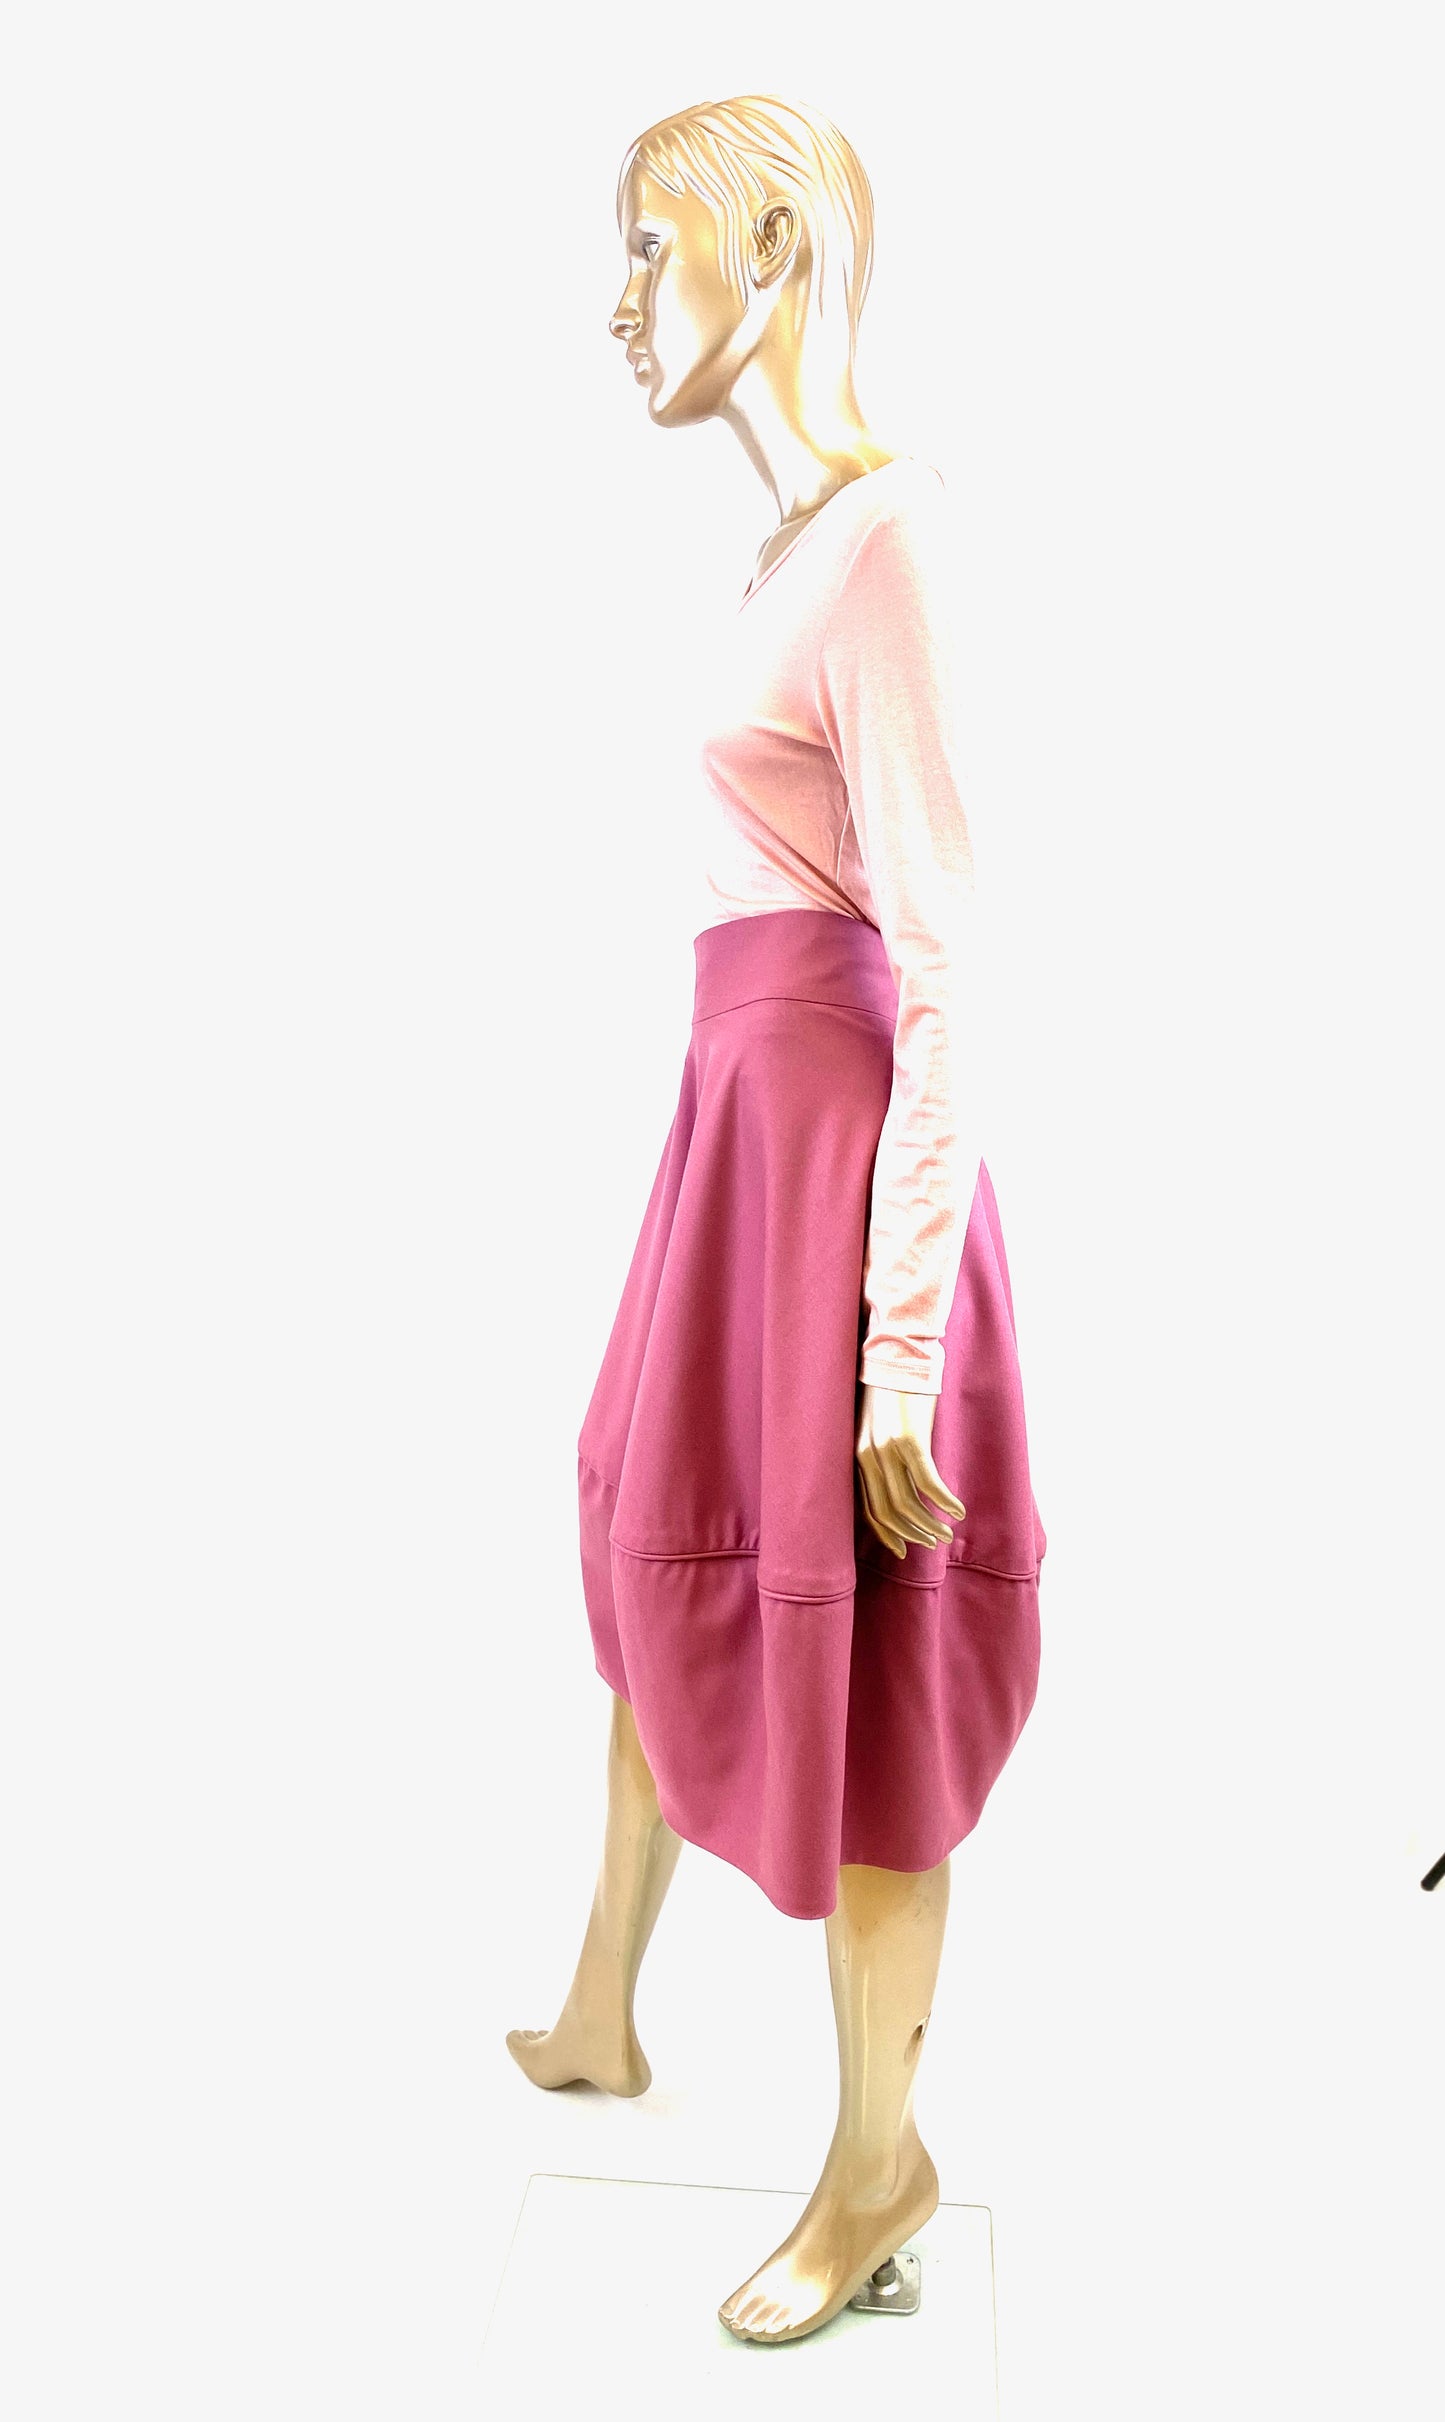 Buble /Tulip style Skirt in Soft /Dusky pink wool cashmire fabric